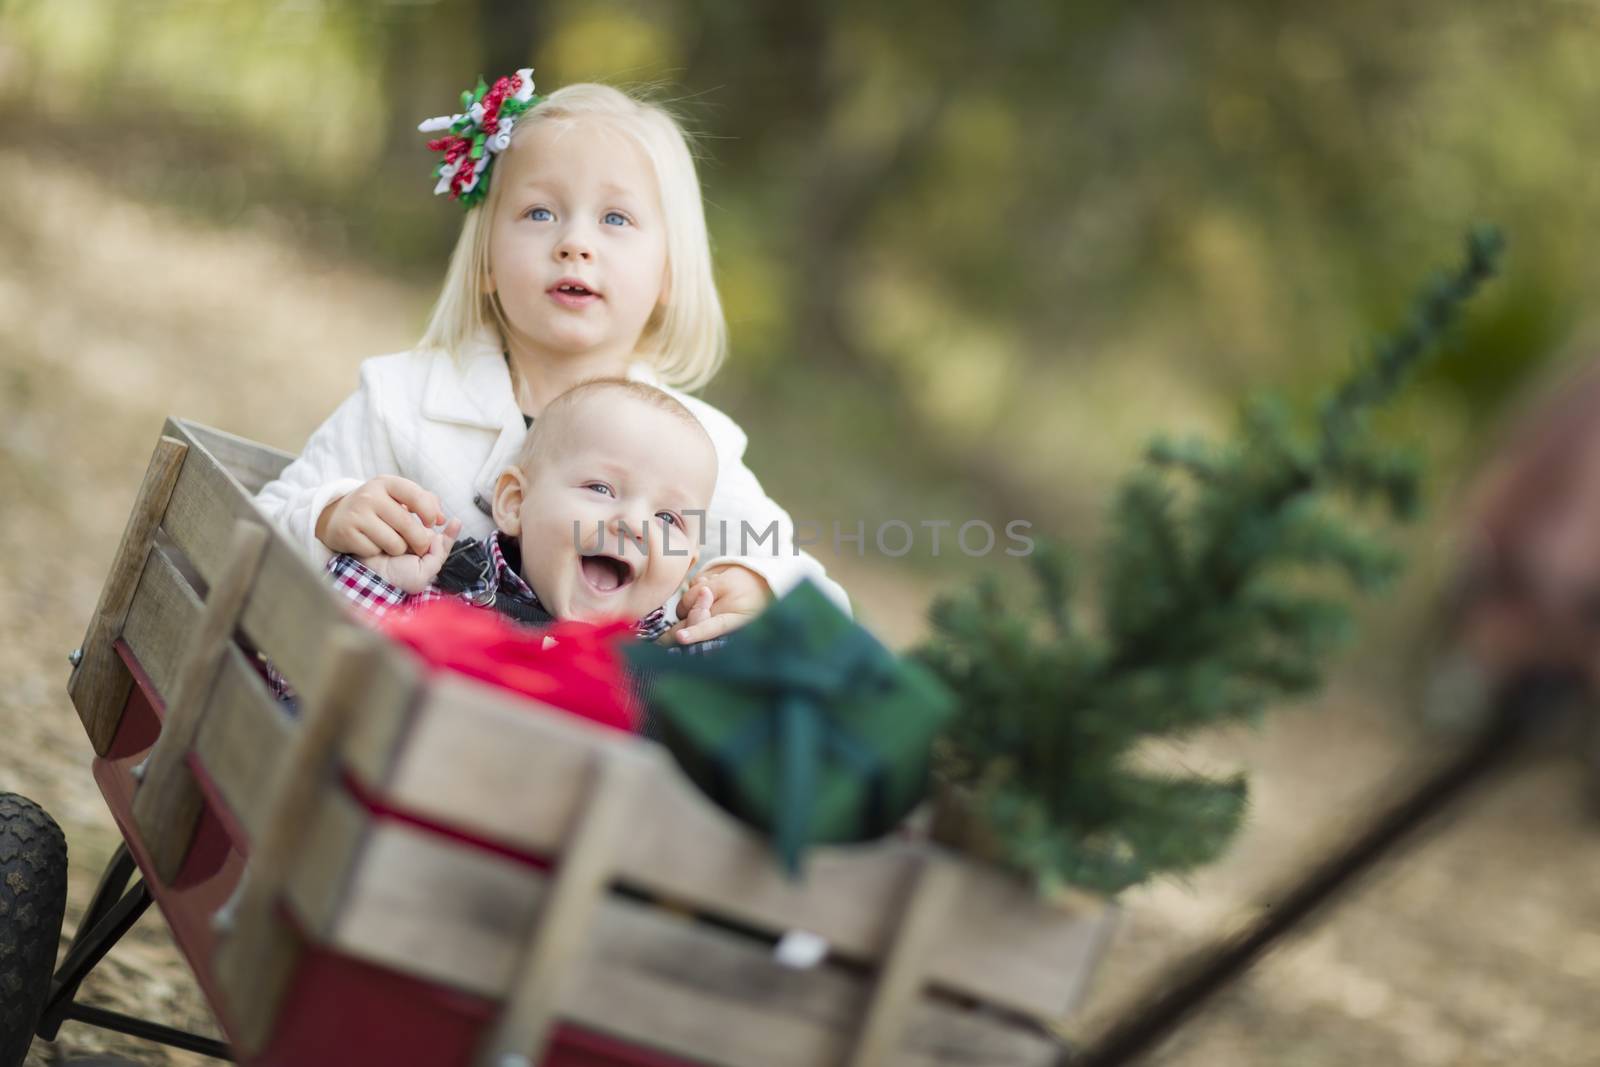 Baby Brother and Sister Being Pulled in Wagon with Christmas Tree and Gifts Outdoors.